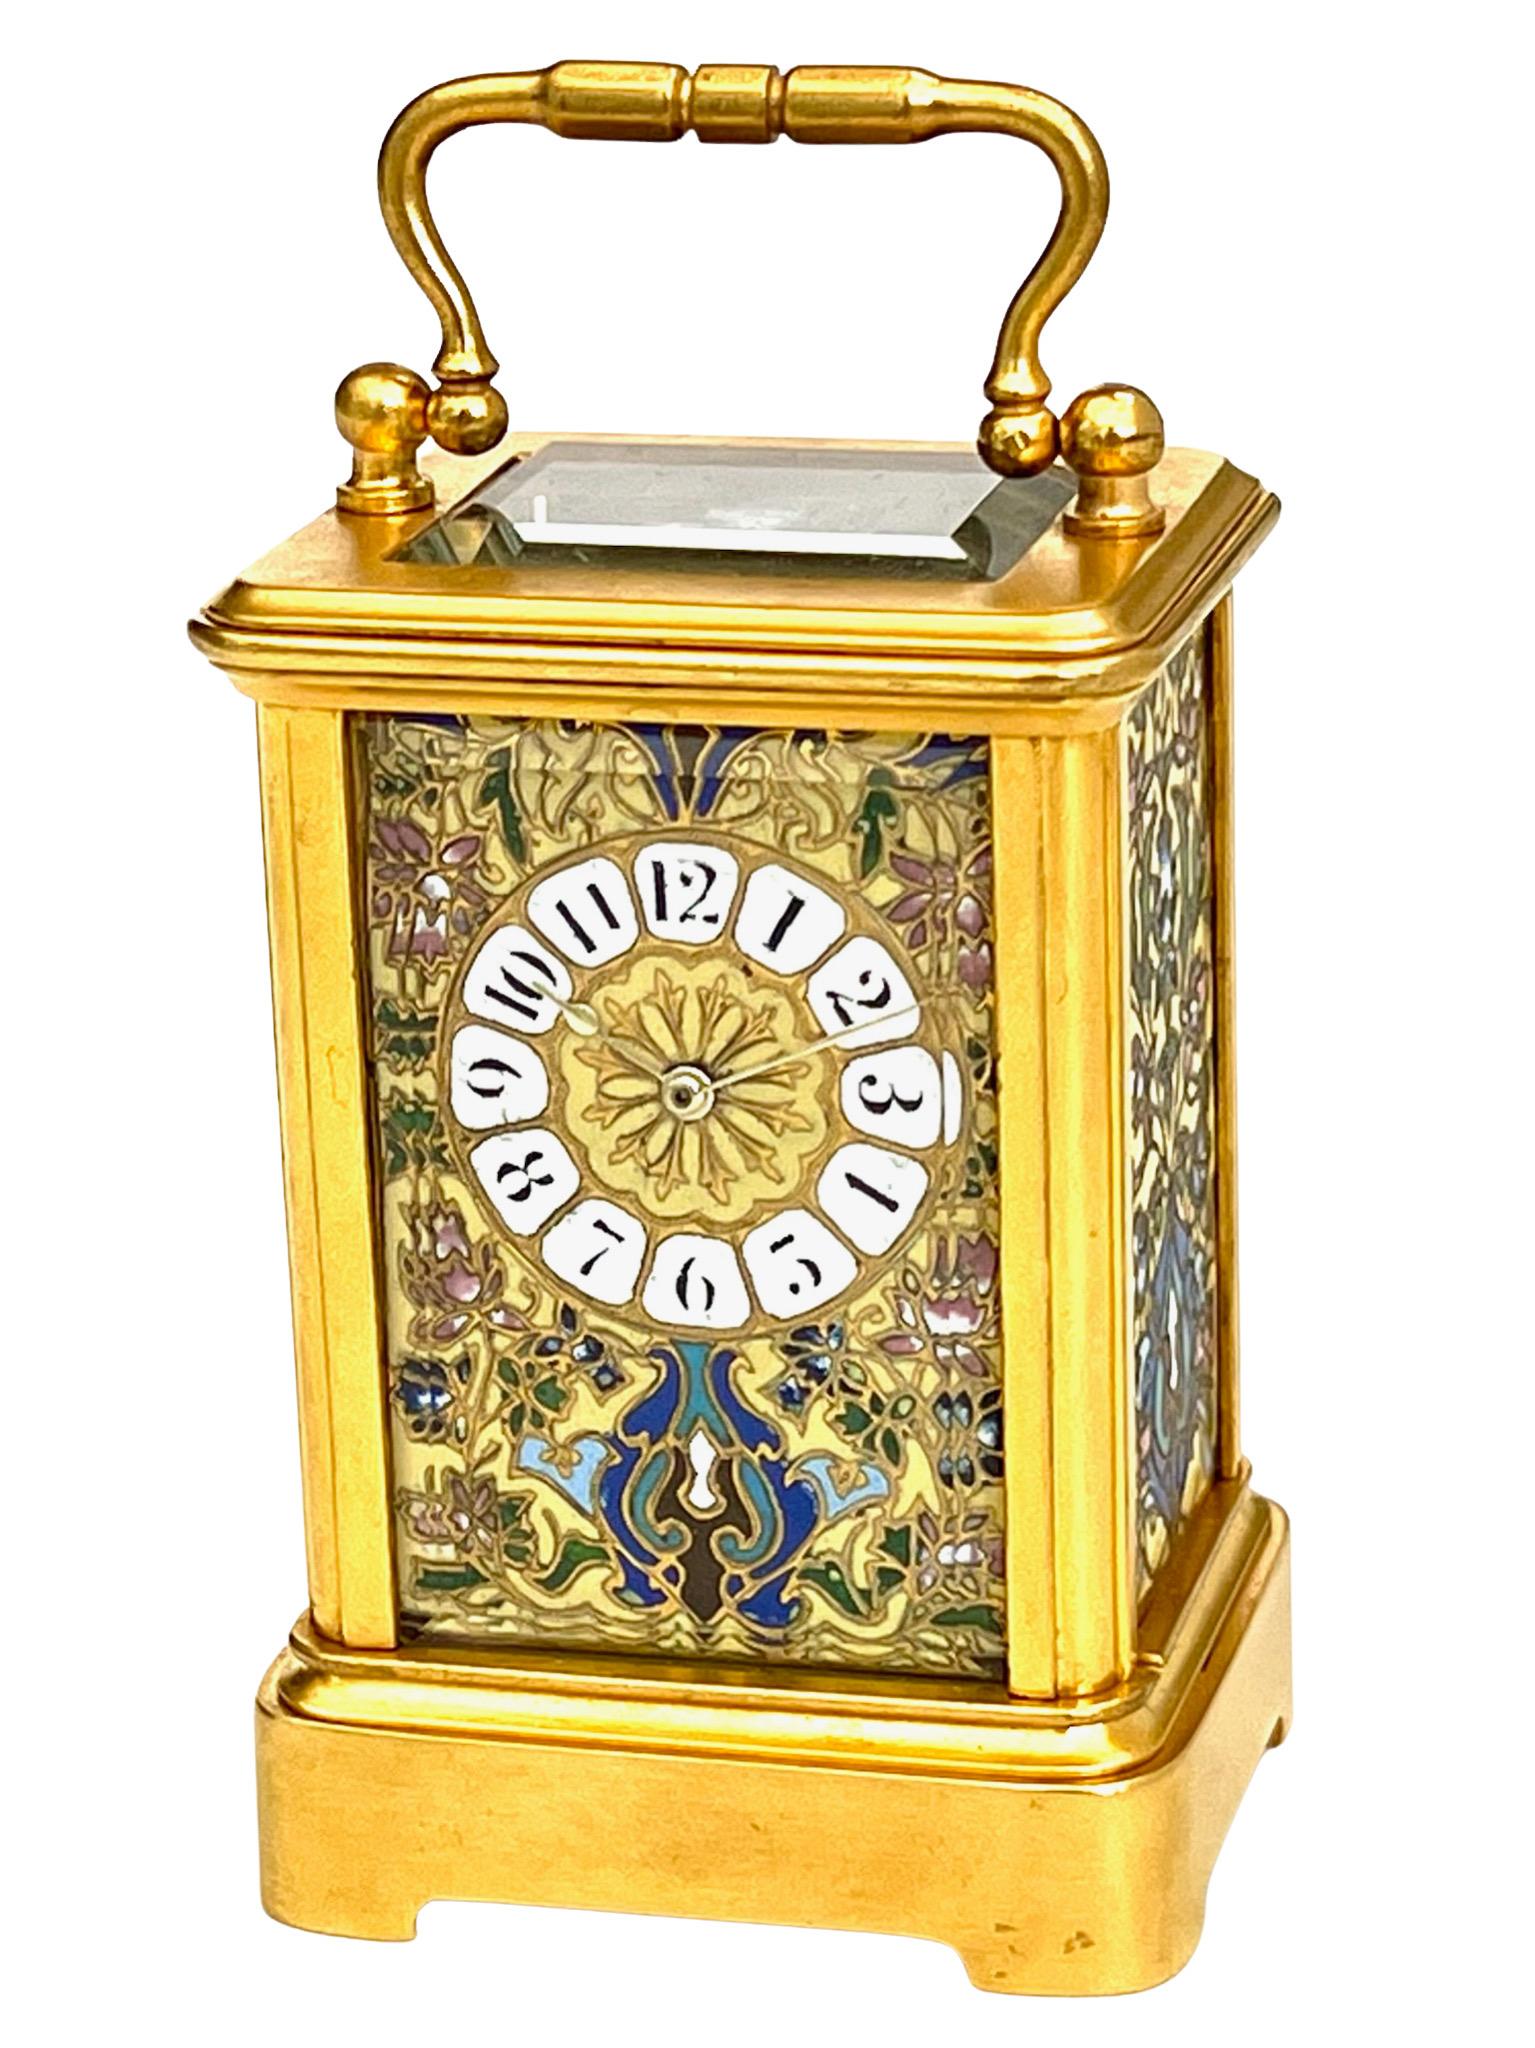 A stunning miniature eight day timepiece carriage clock with highly attractive and finely executed Champlevé enamel panels. The colour combination including rich yellow, greens and blues is quite unusual and seldom seen. The richly gilded miniature